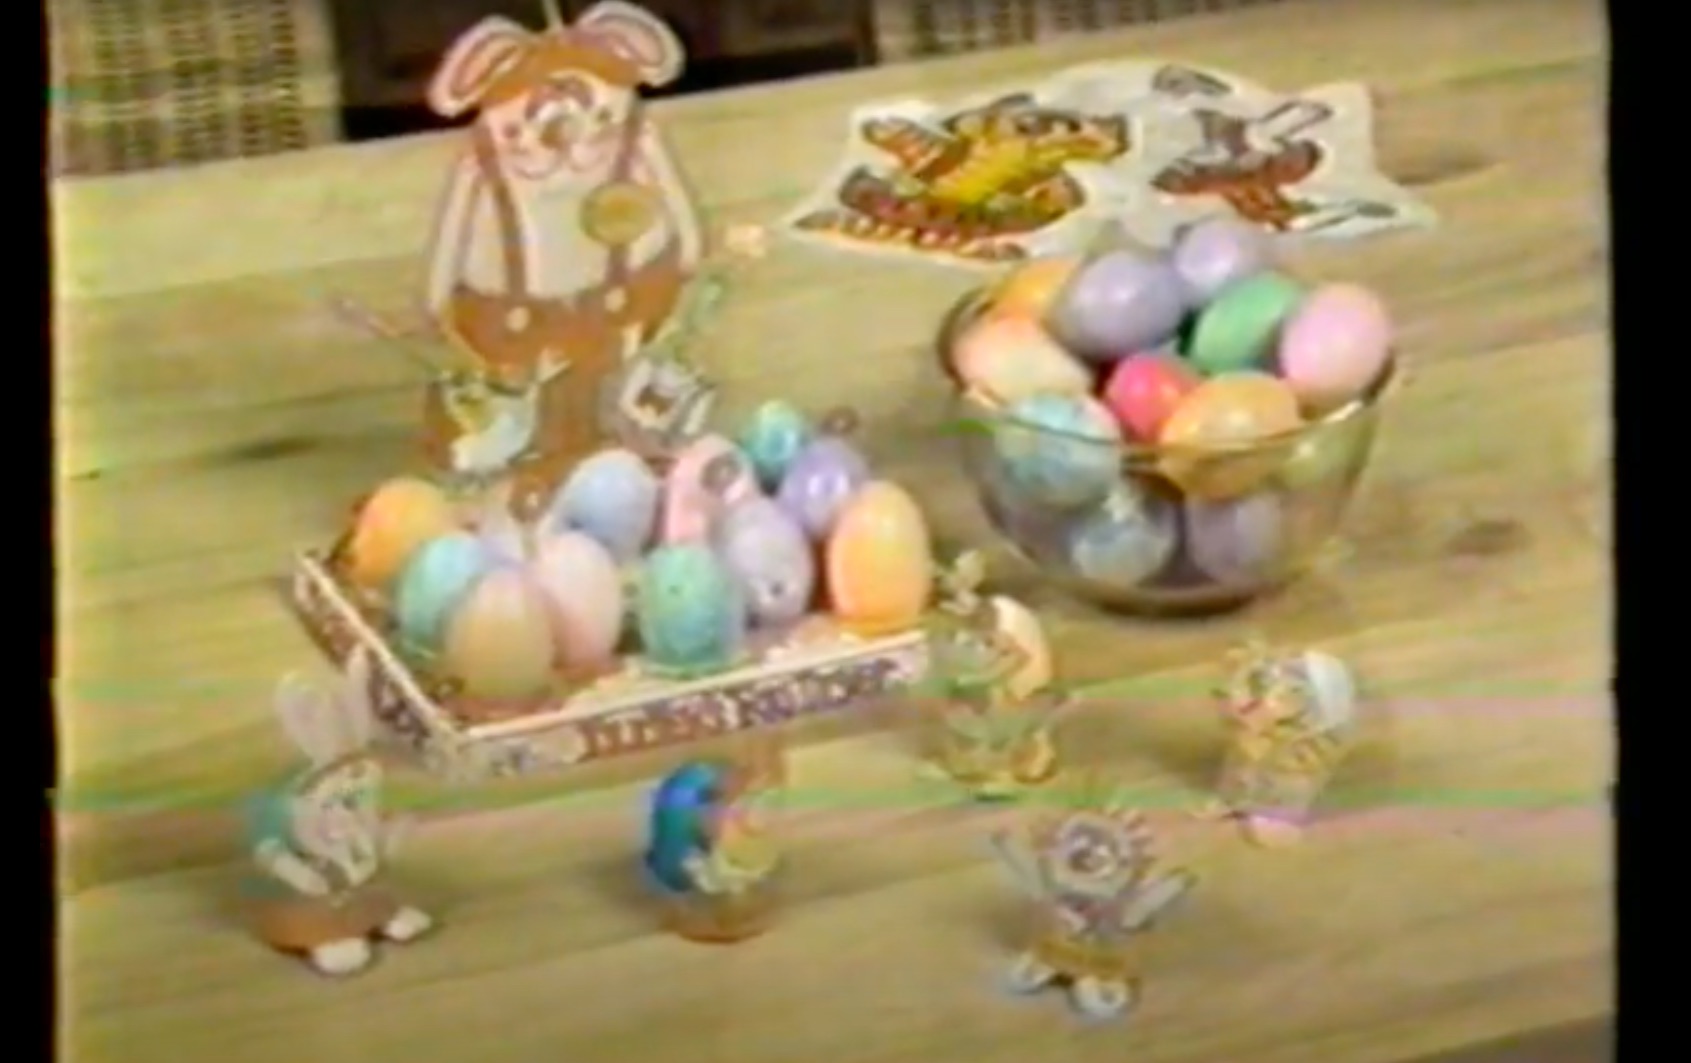 image from a 1981 commercial for Shake-an-Egg Easter egg coloring kit. On a table is a bowl of colored eggs. Next to it is a paper stand with Dudley Rabbit, the Shake-an-Egg mascot, looking over more colored eggs that are placed in the paper stand. In front of that, more eggs are being held by paper cutouts of Dudley and other characters.